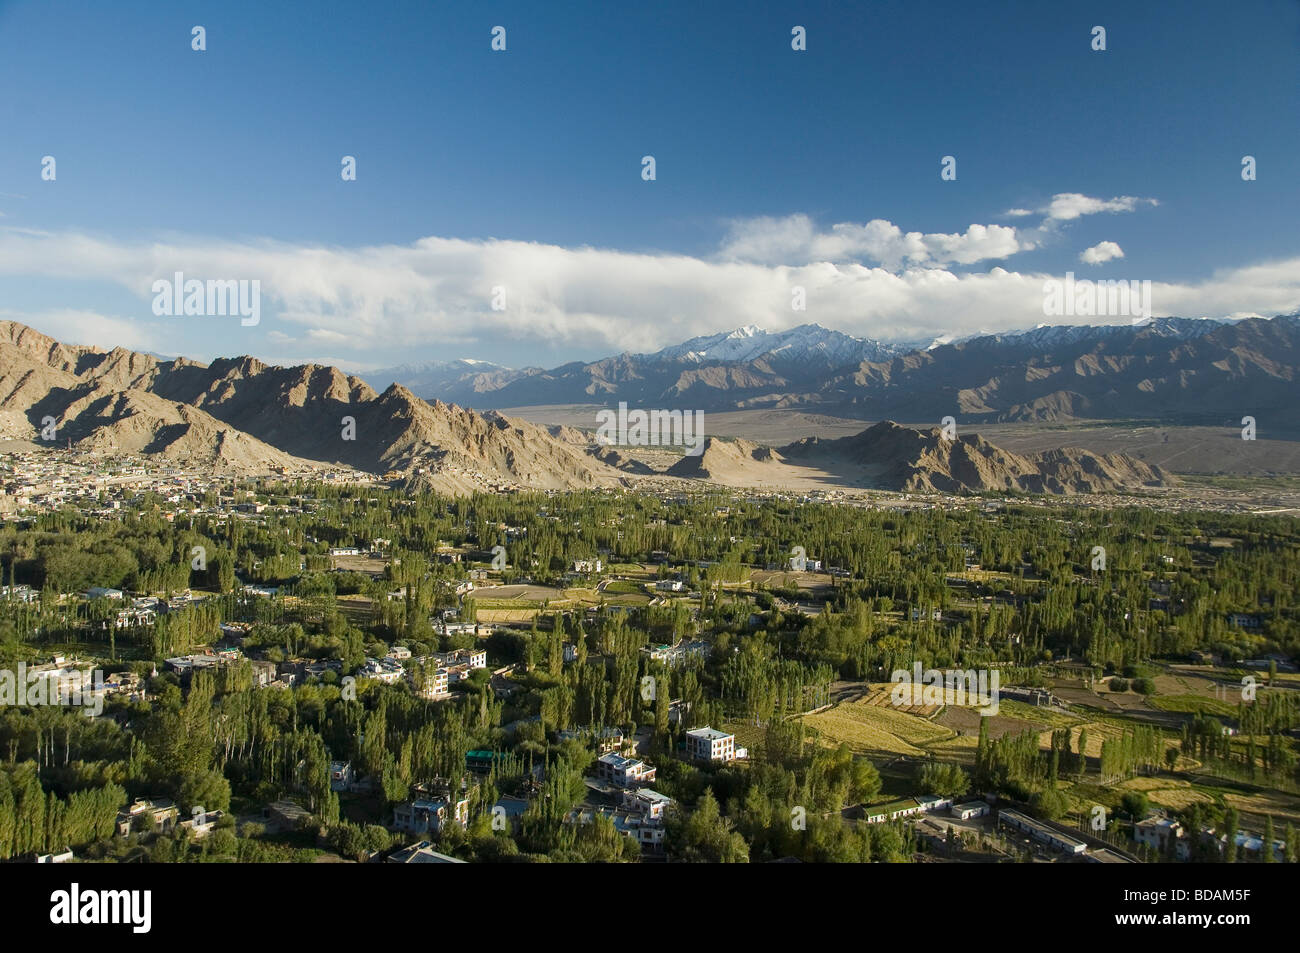 Town in front of a mountain range, Himalayas, Leh, Ladakh, Jammu and Kashmir, India Stock Photo